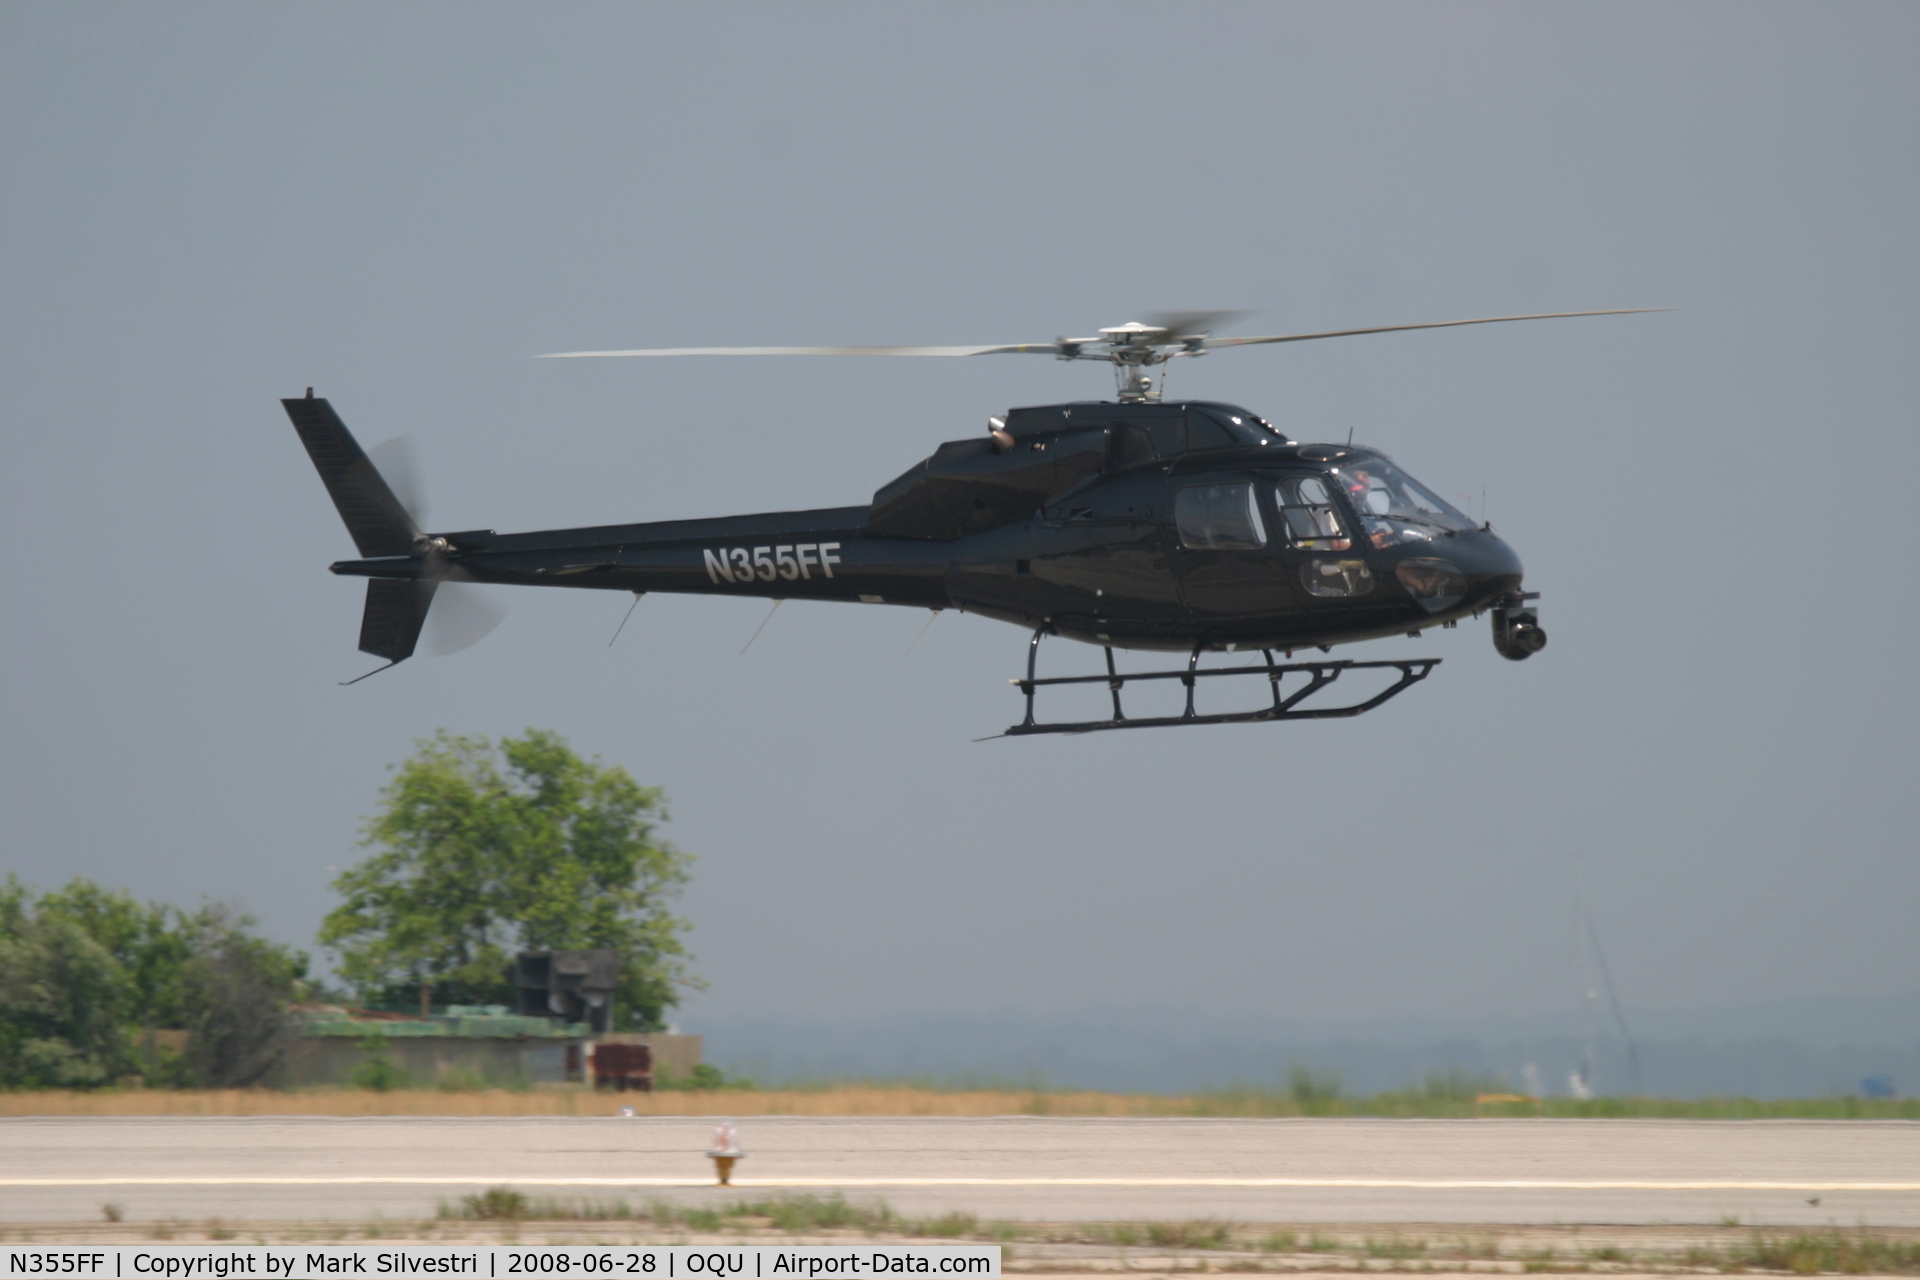 N355FF, 1982 Aerospatiale AS-355F-1 Ecureuil 2 C/N 5133, Quonset Point 2008